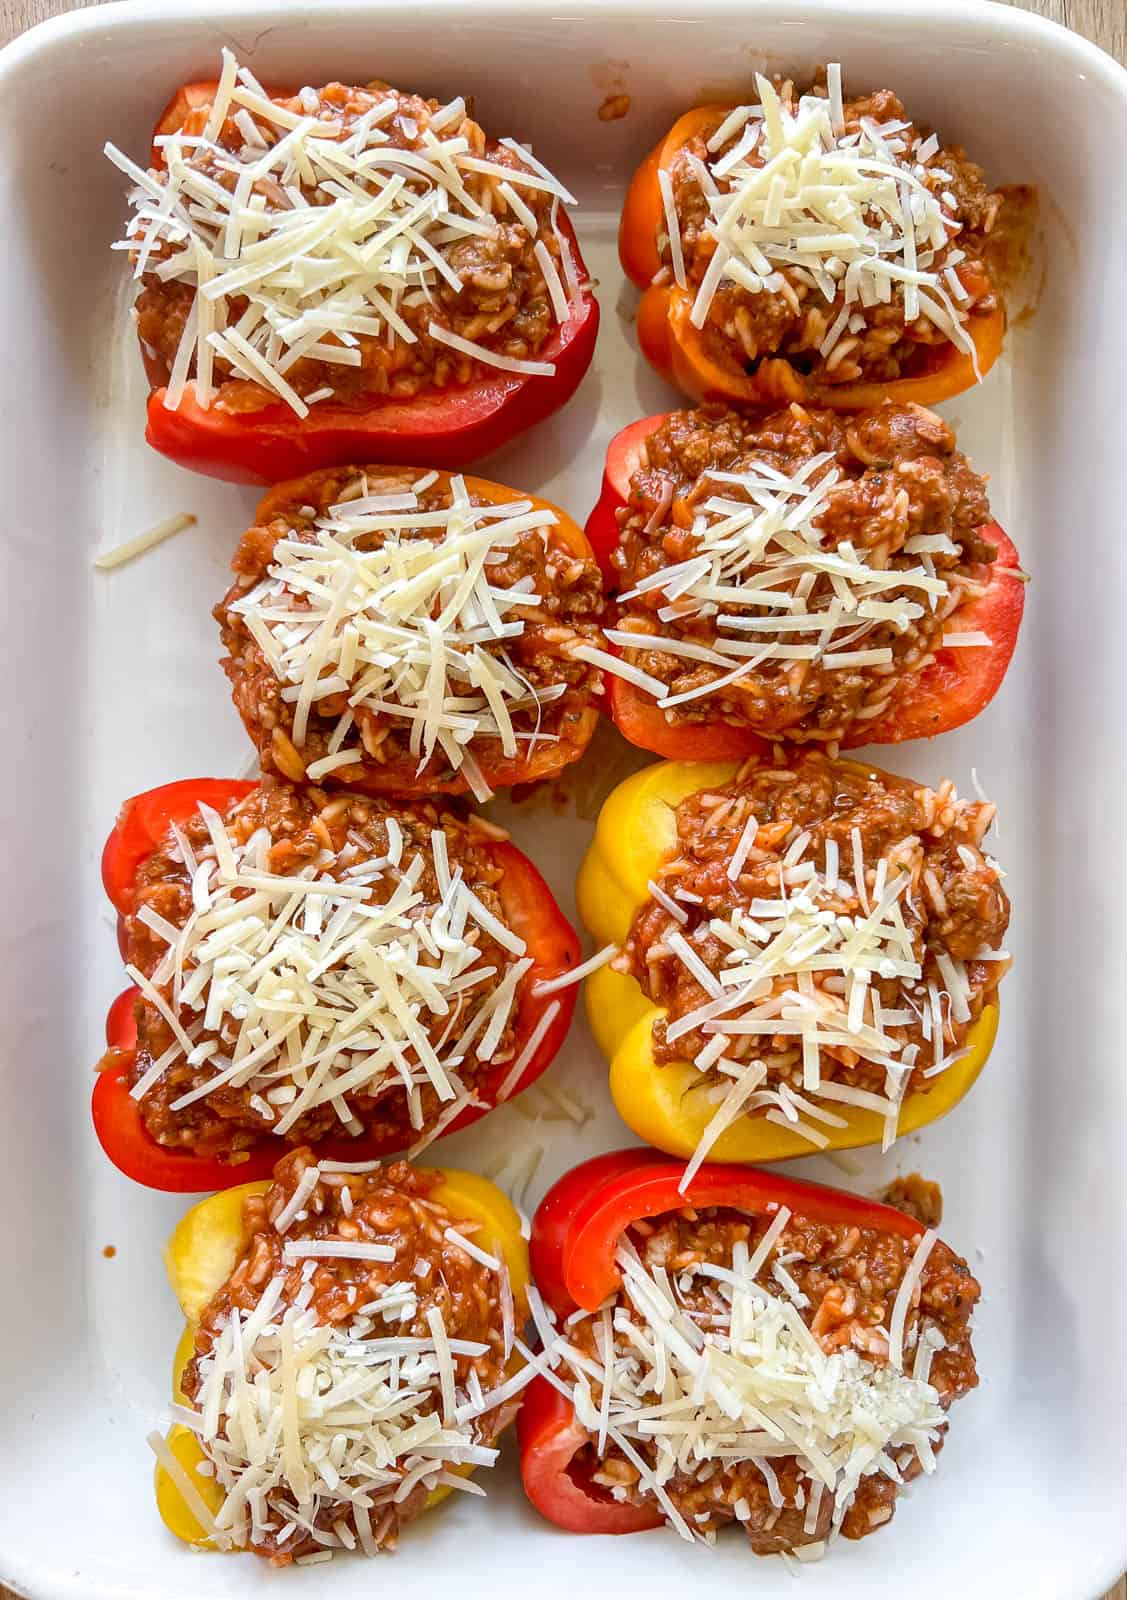 Cheese sprinkled on top of stuffed peppers before baking.